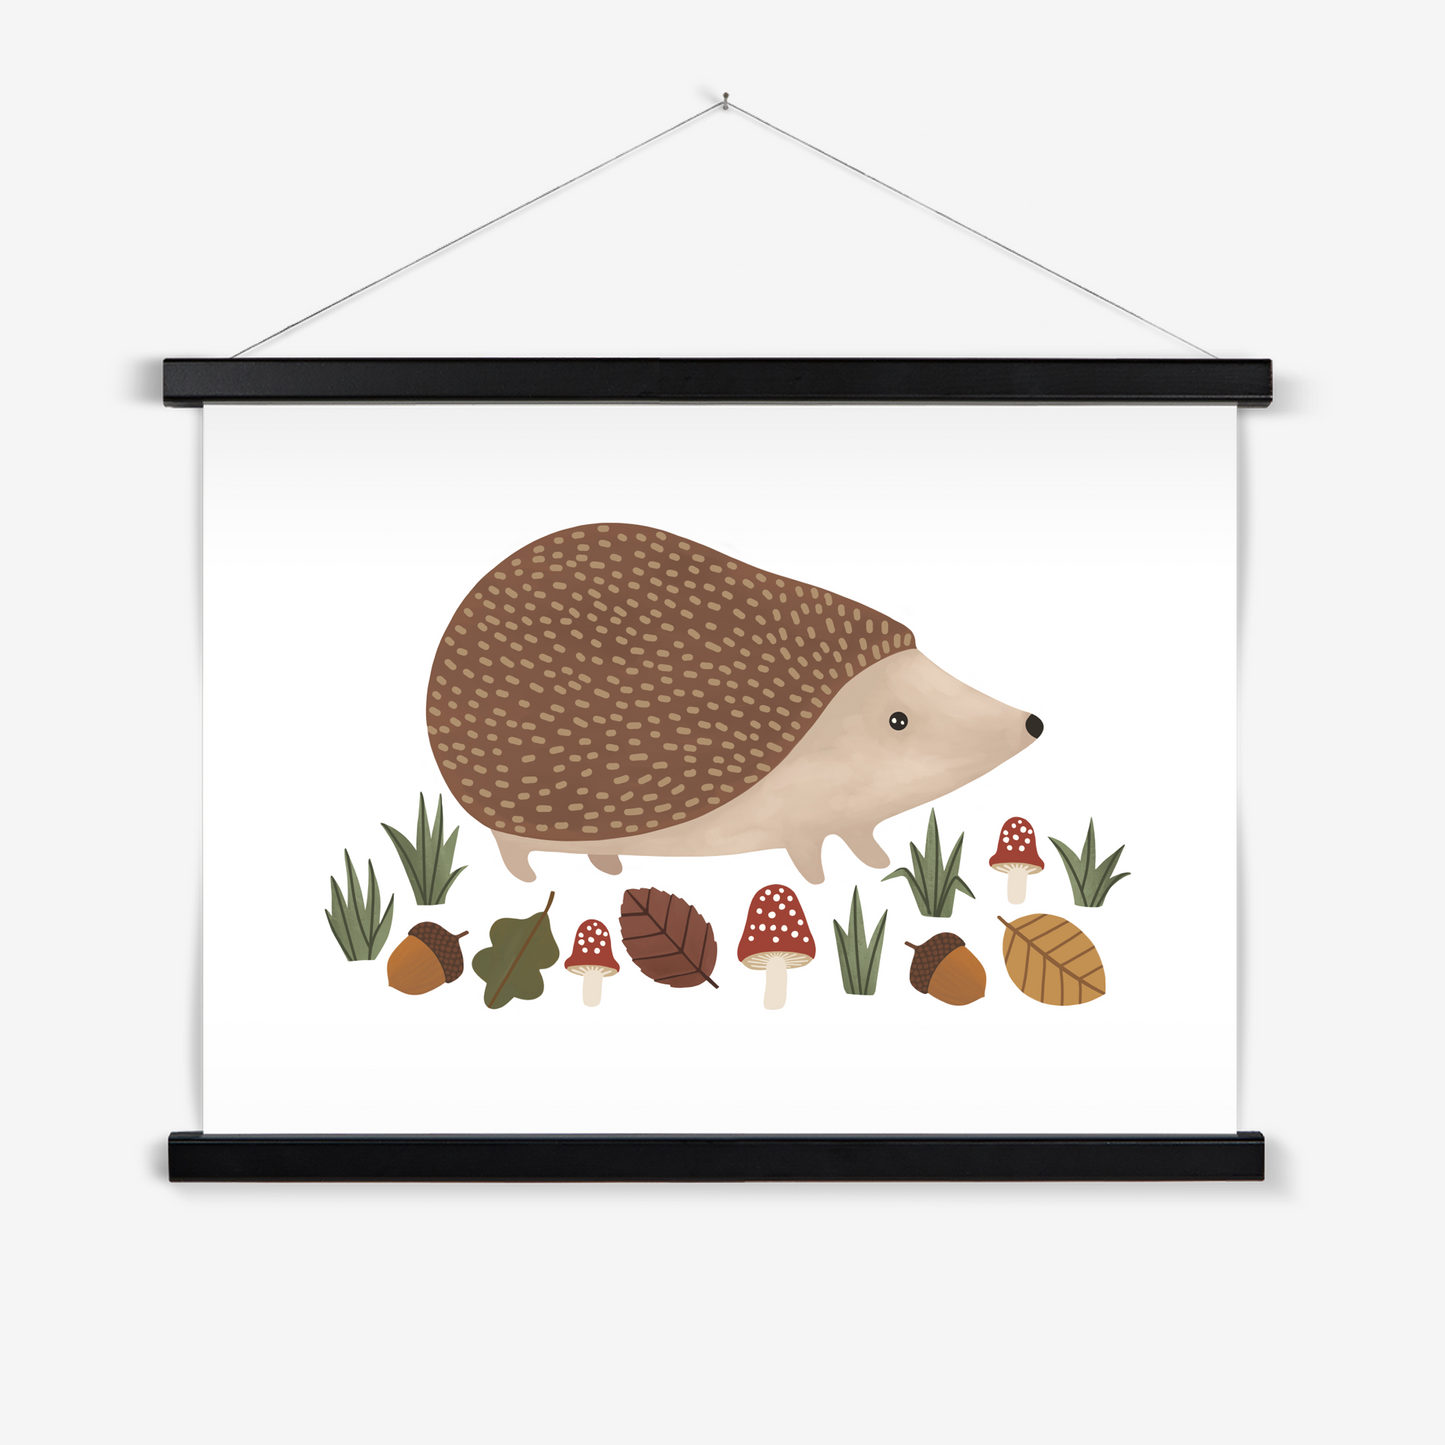 Hedgehog in white / Print with Hanger